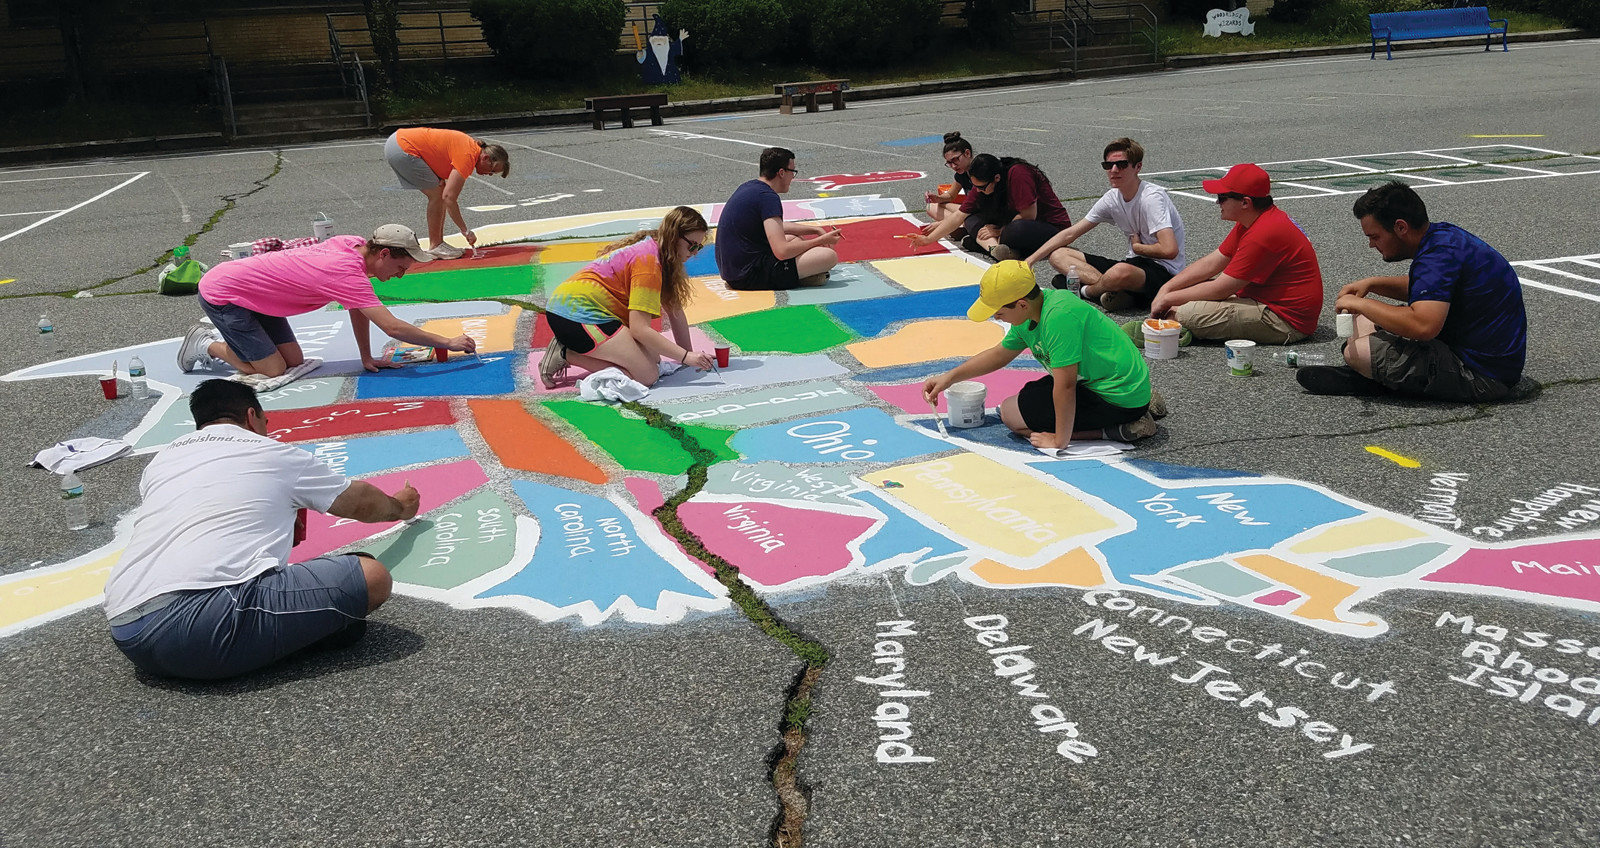 FUTURE EAGLE SCOUT: Jeffrey Marchetti, a Woodridge Elementary School alumnus, chose to redo the blacktop artwork for the current students and those of future generations to enjoy as his Eagle Scout project.